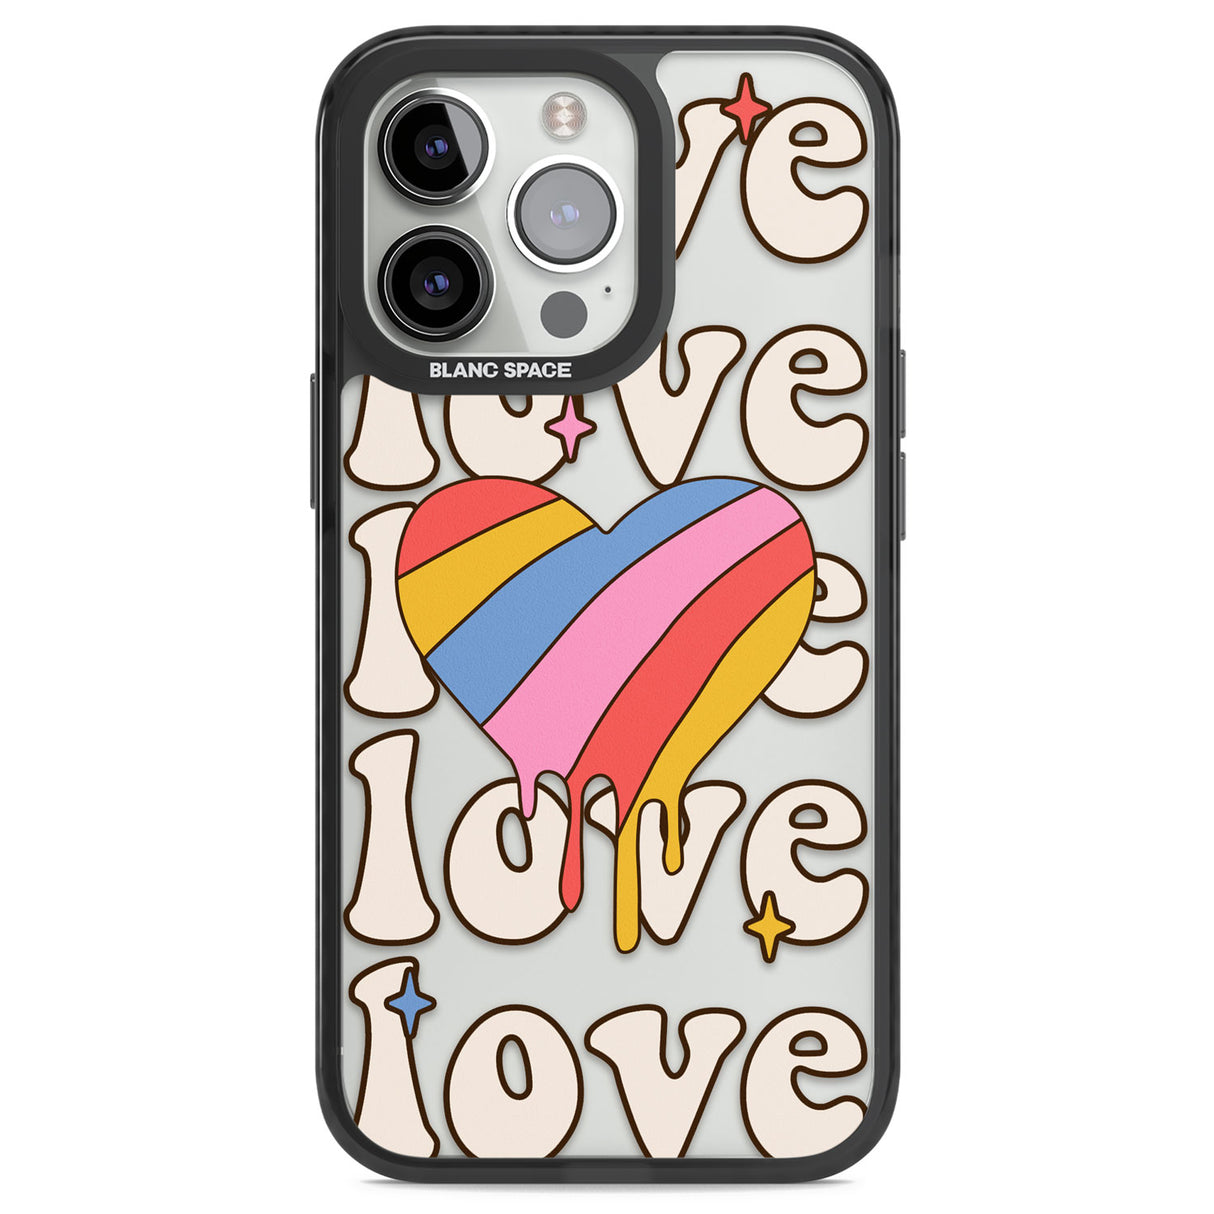 Groovy Love Black Impact Phone Case for iPhone 13 Pro, iPhone 14 Pro, iPhone 15 Pro